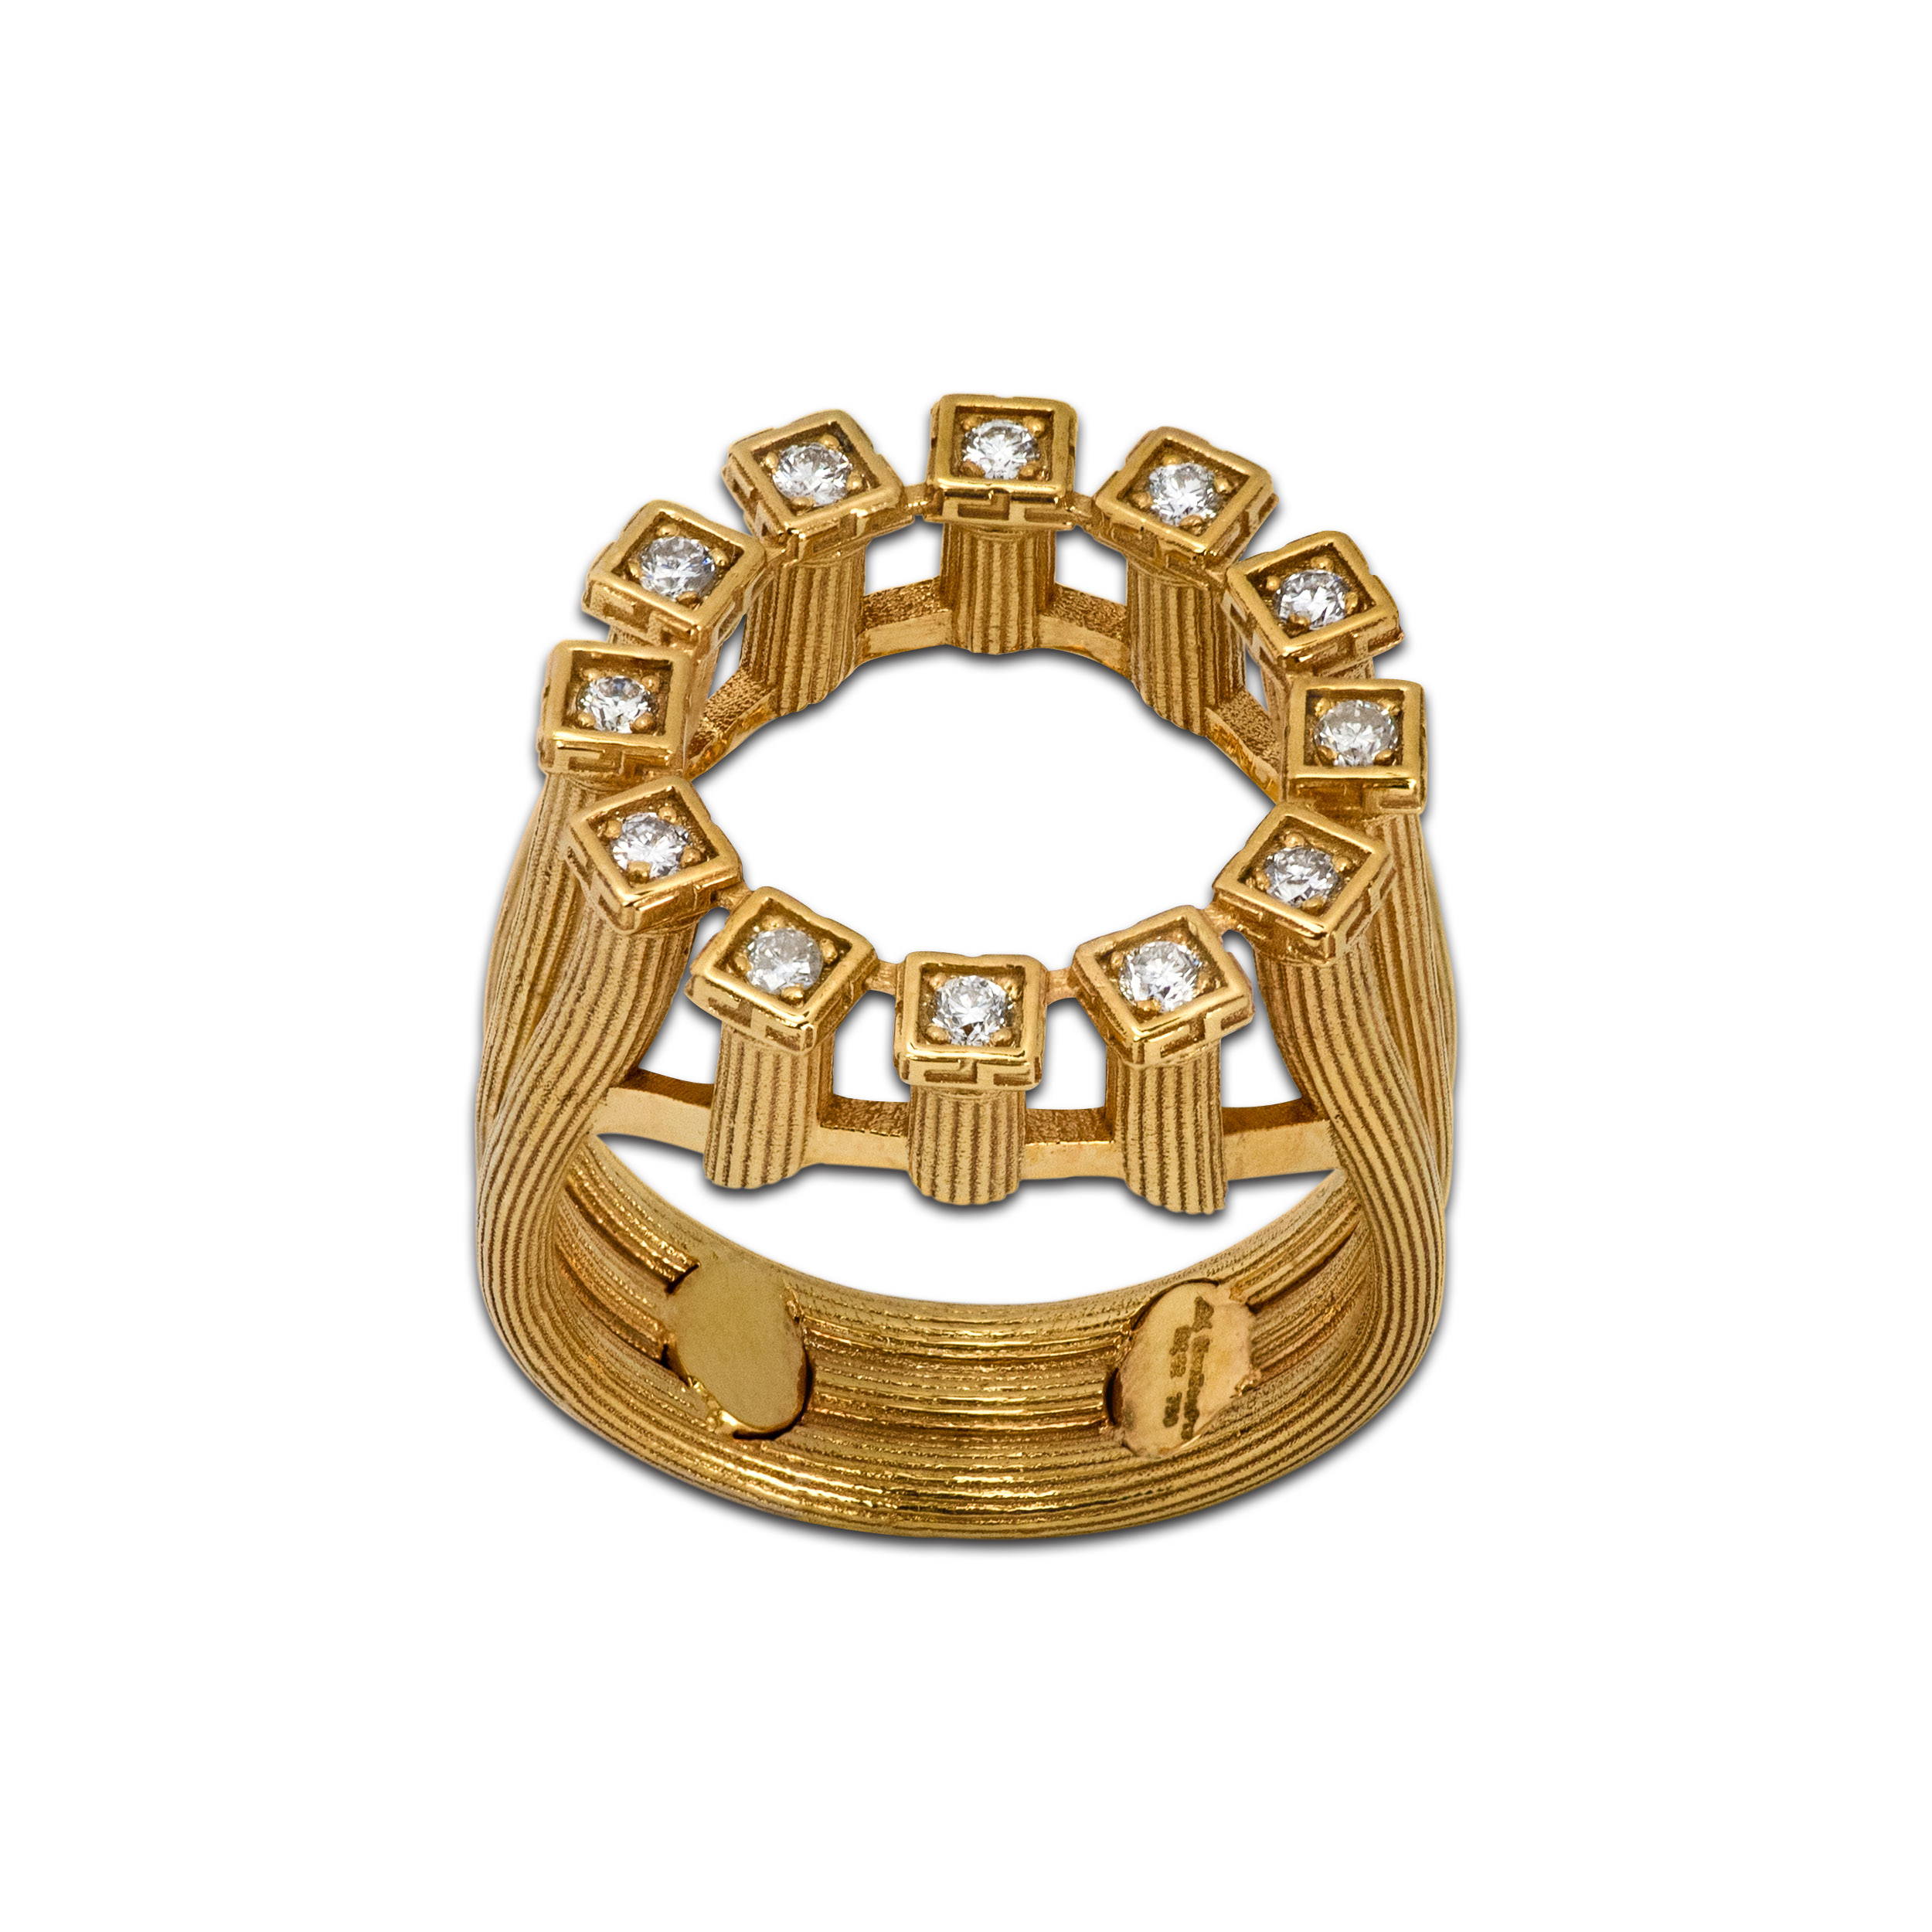 classical women's ring made from gold and real diamonds